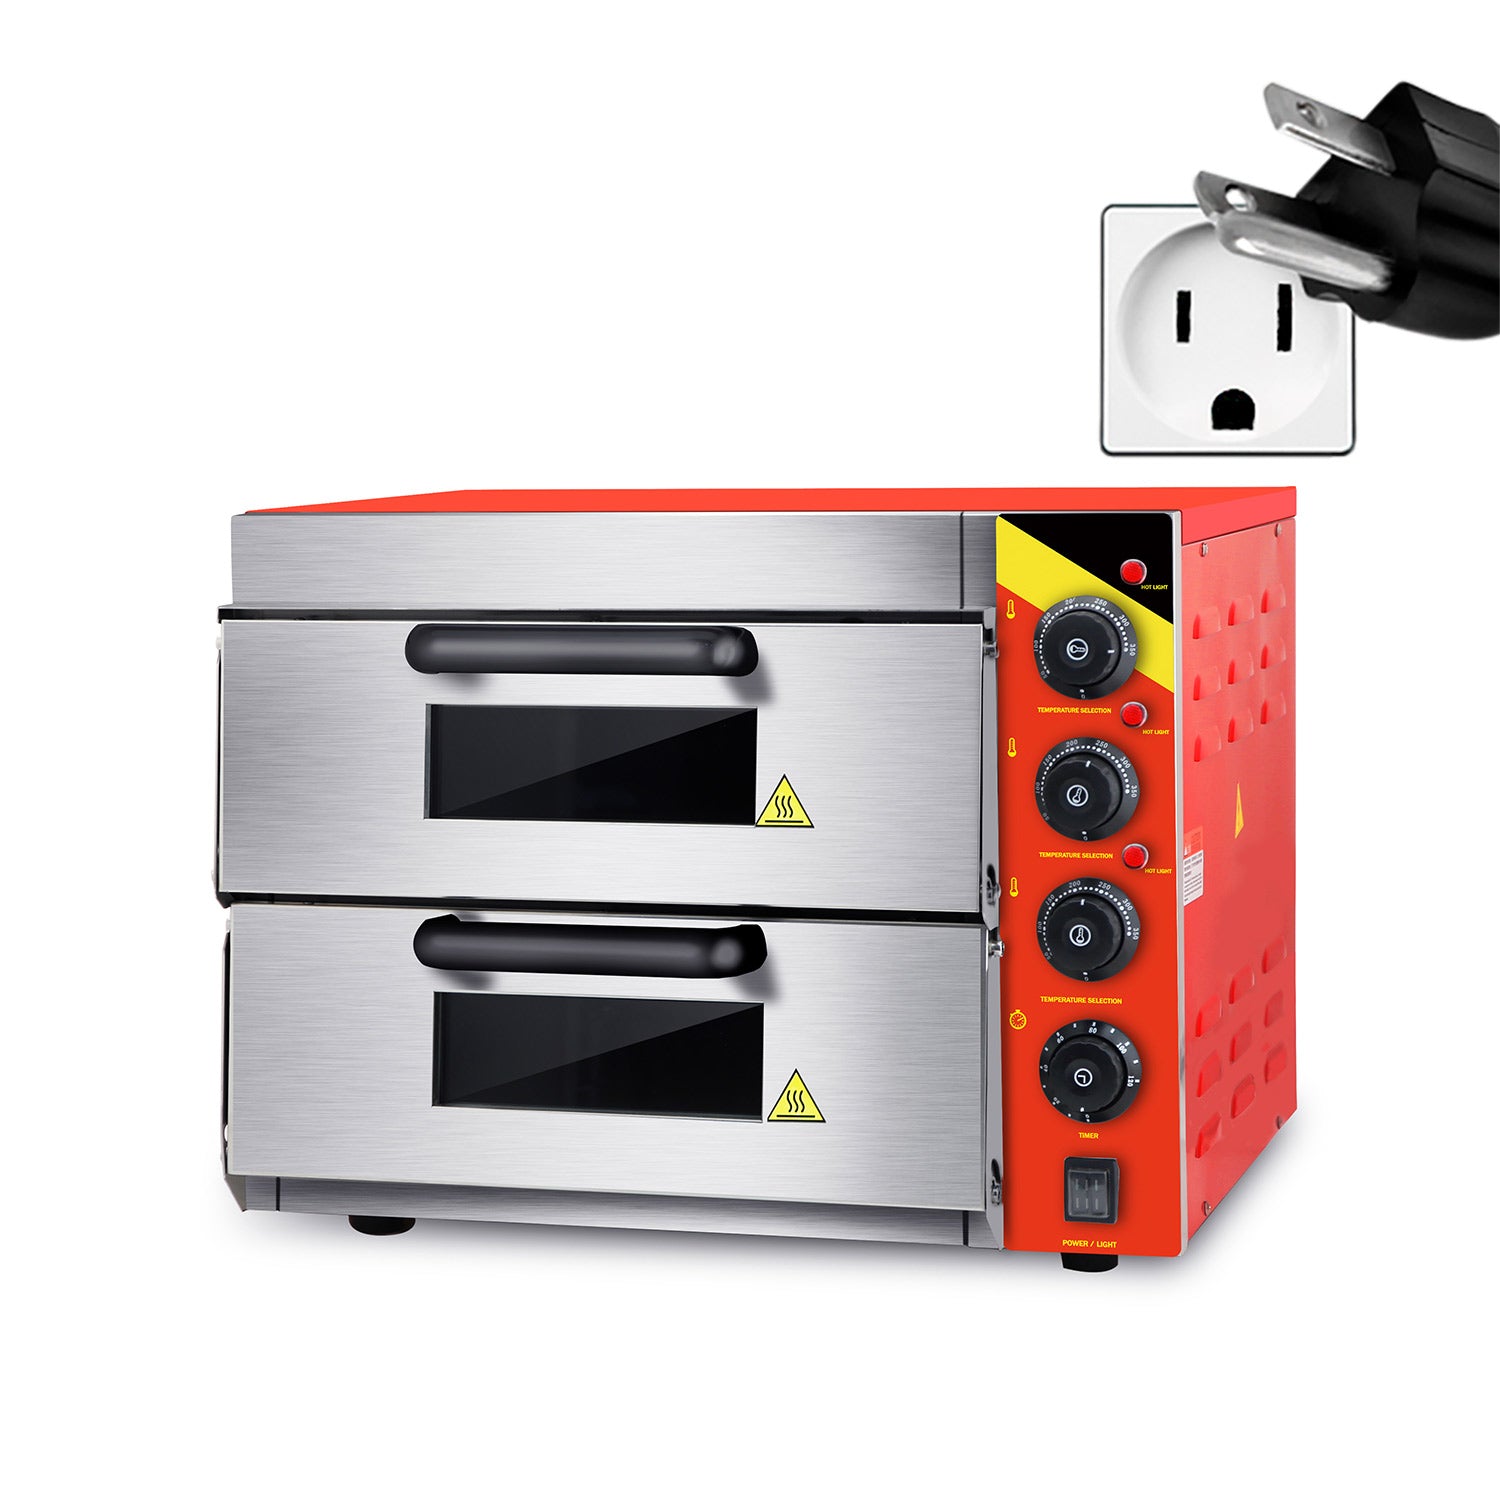 ALDKitchen Pizza Maker | Electric Pizza Oven | 2 Pcs | Stainless Steel | 110V